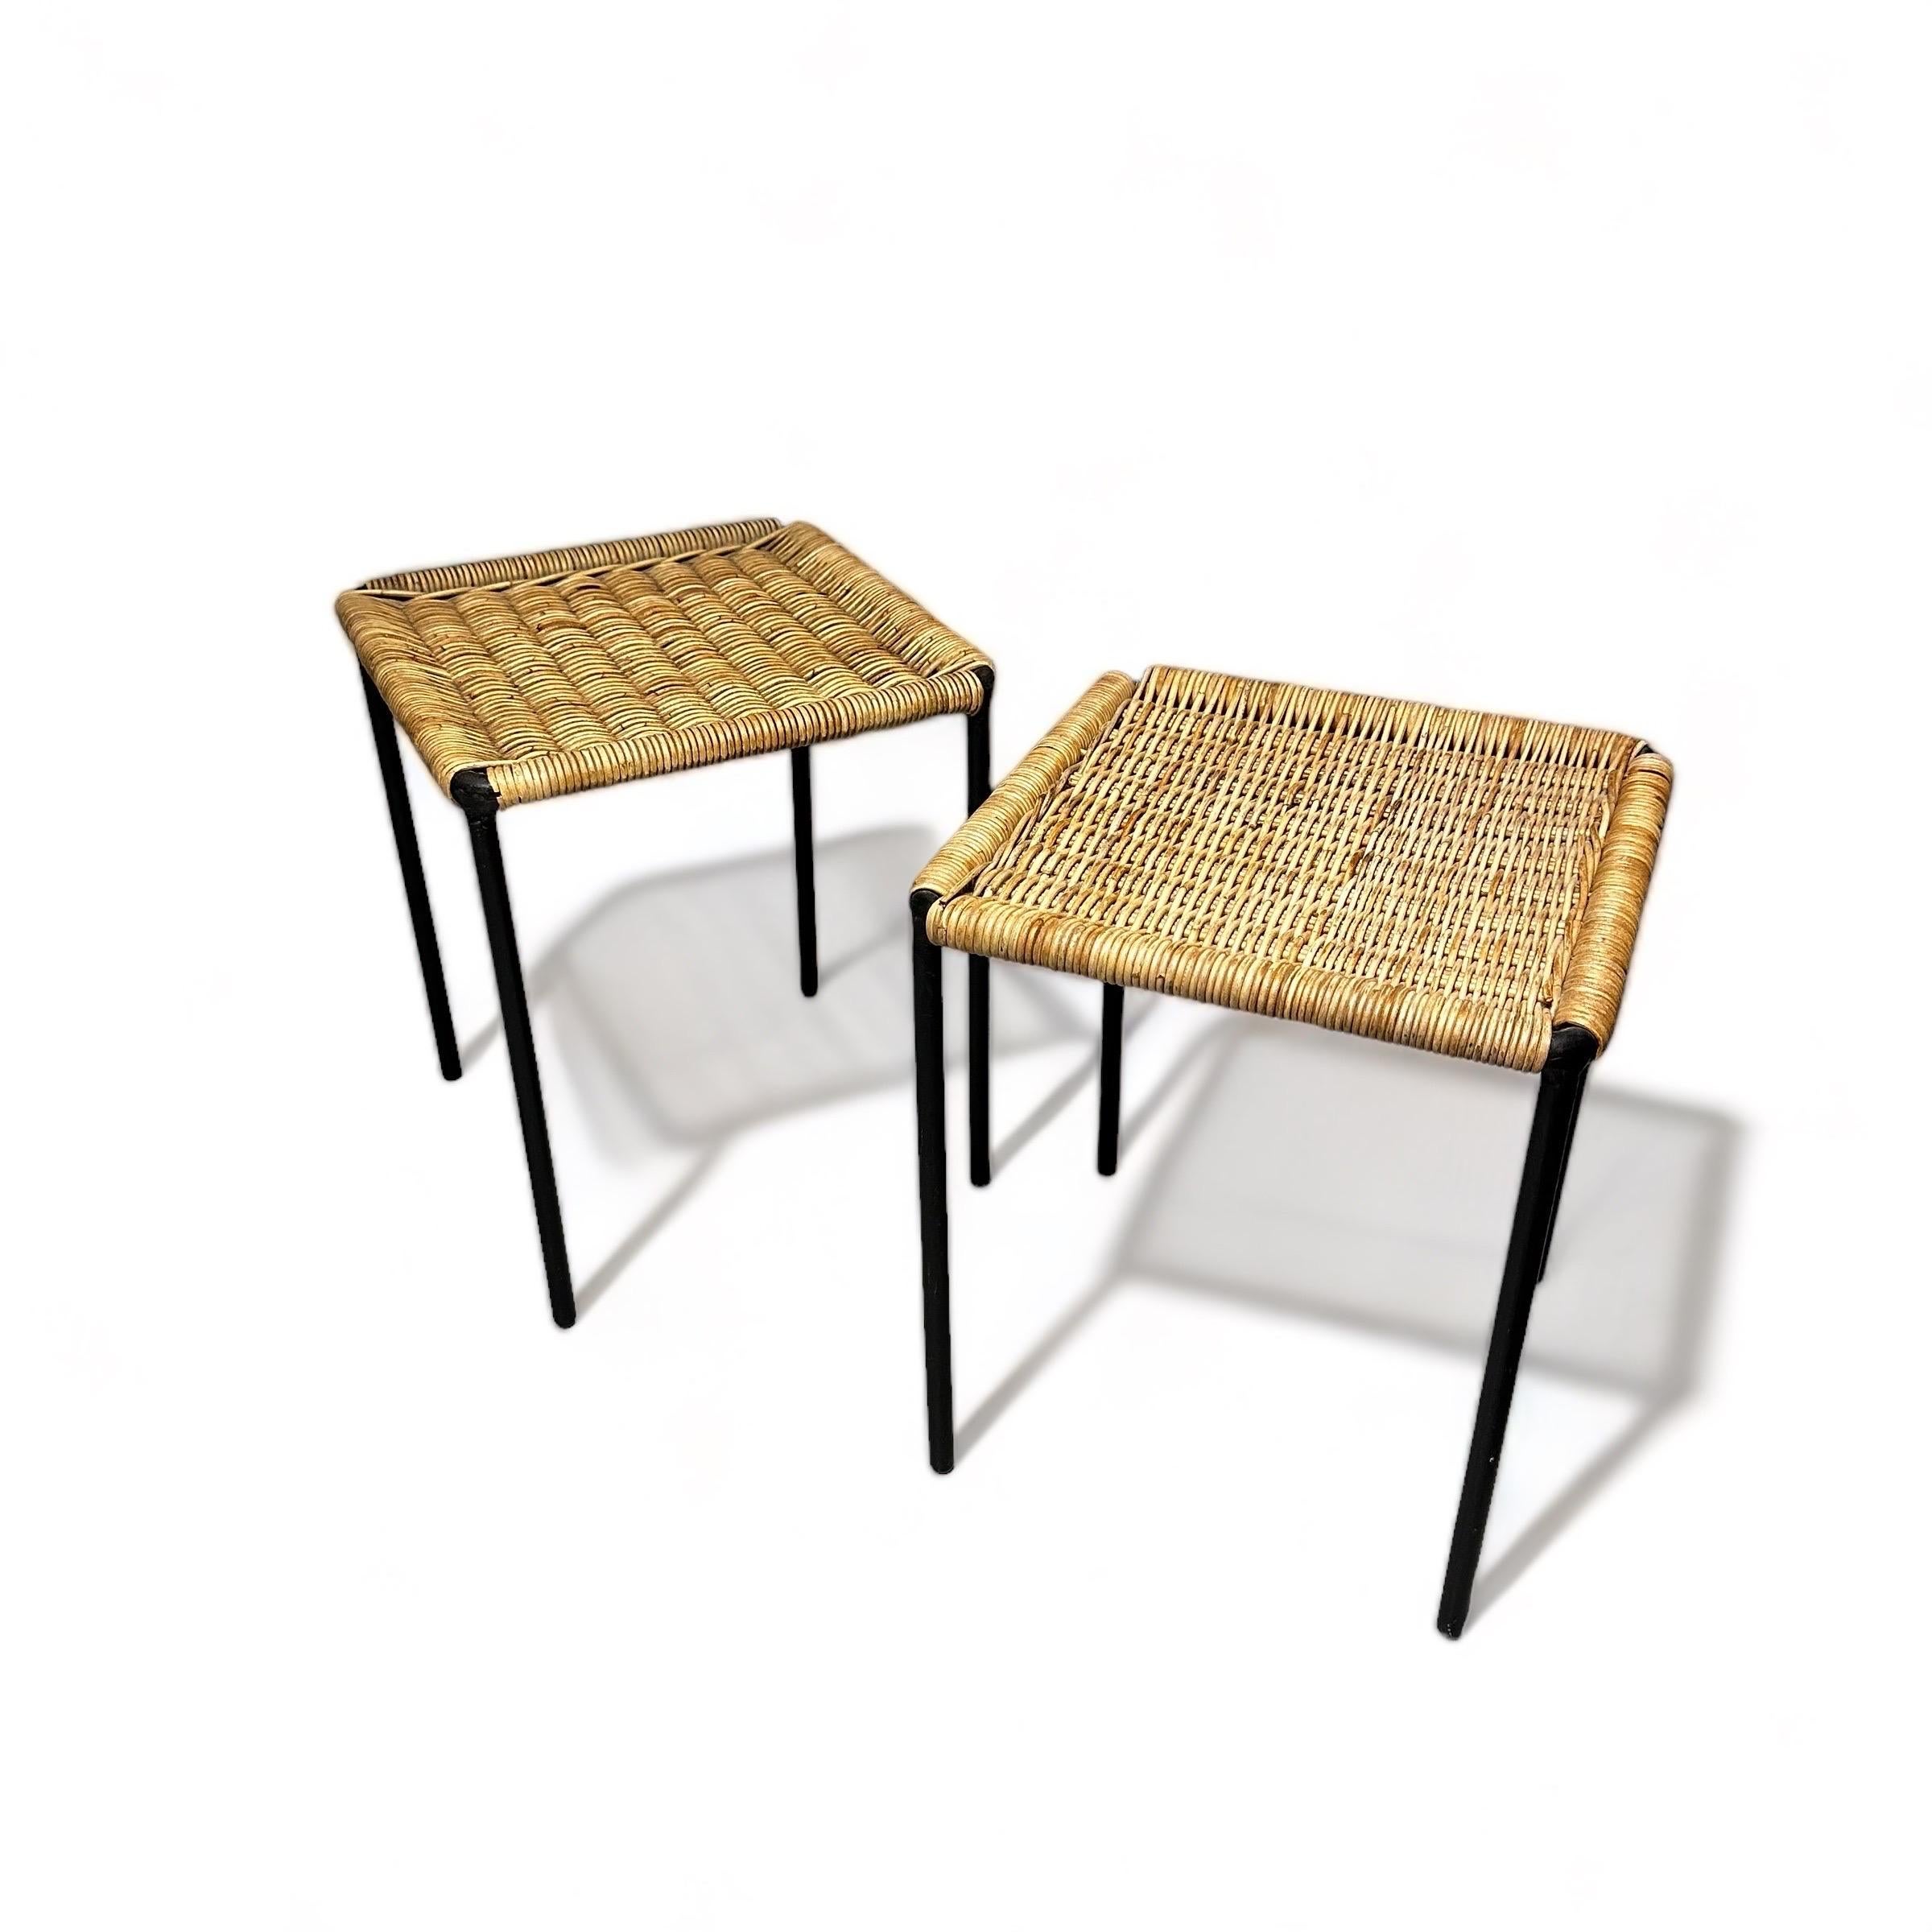 Carl Auböck Side Tables with Black Iron and Rattan, Set of Two, Austria 1950s.